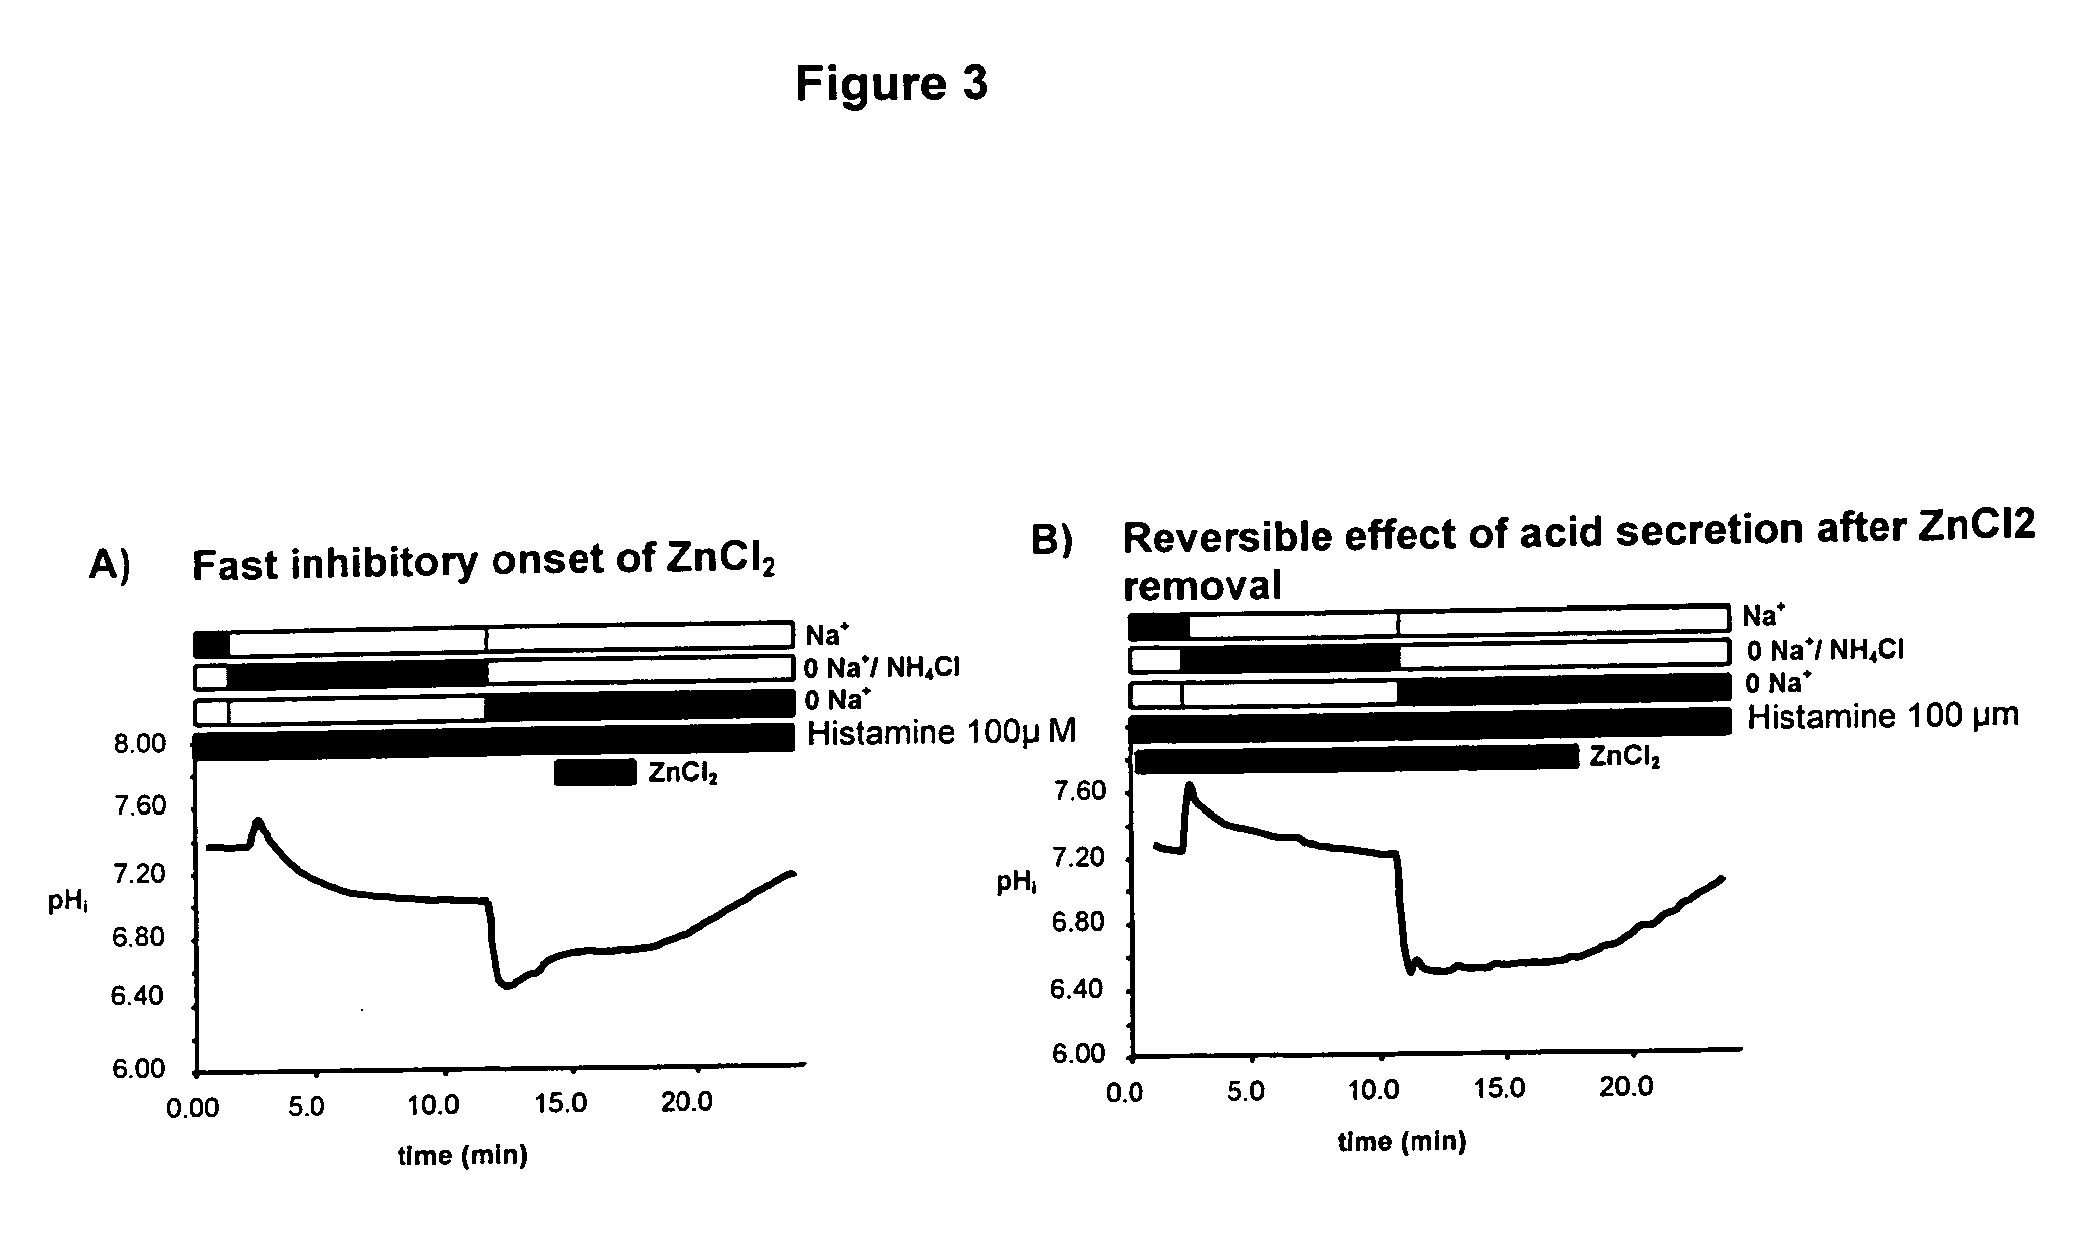 Compostions with enhanced bioavailability and fast acting inhibitor or gastric acid secretion